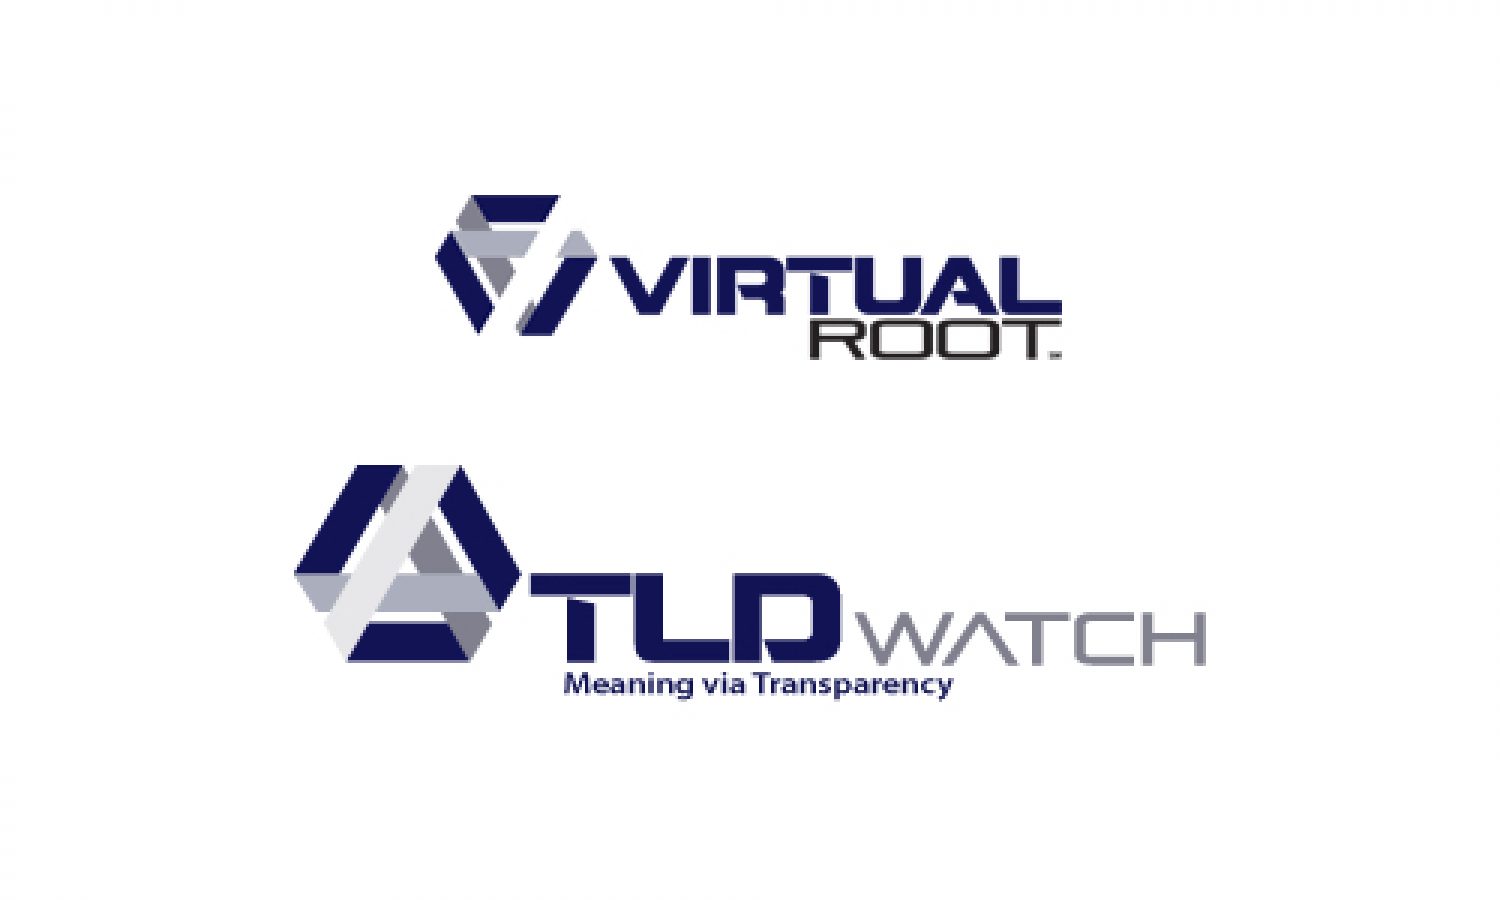 VirtualRoot and TLDWatch